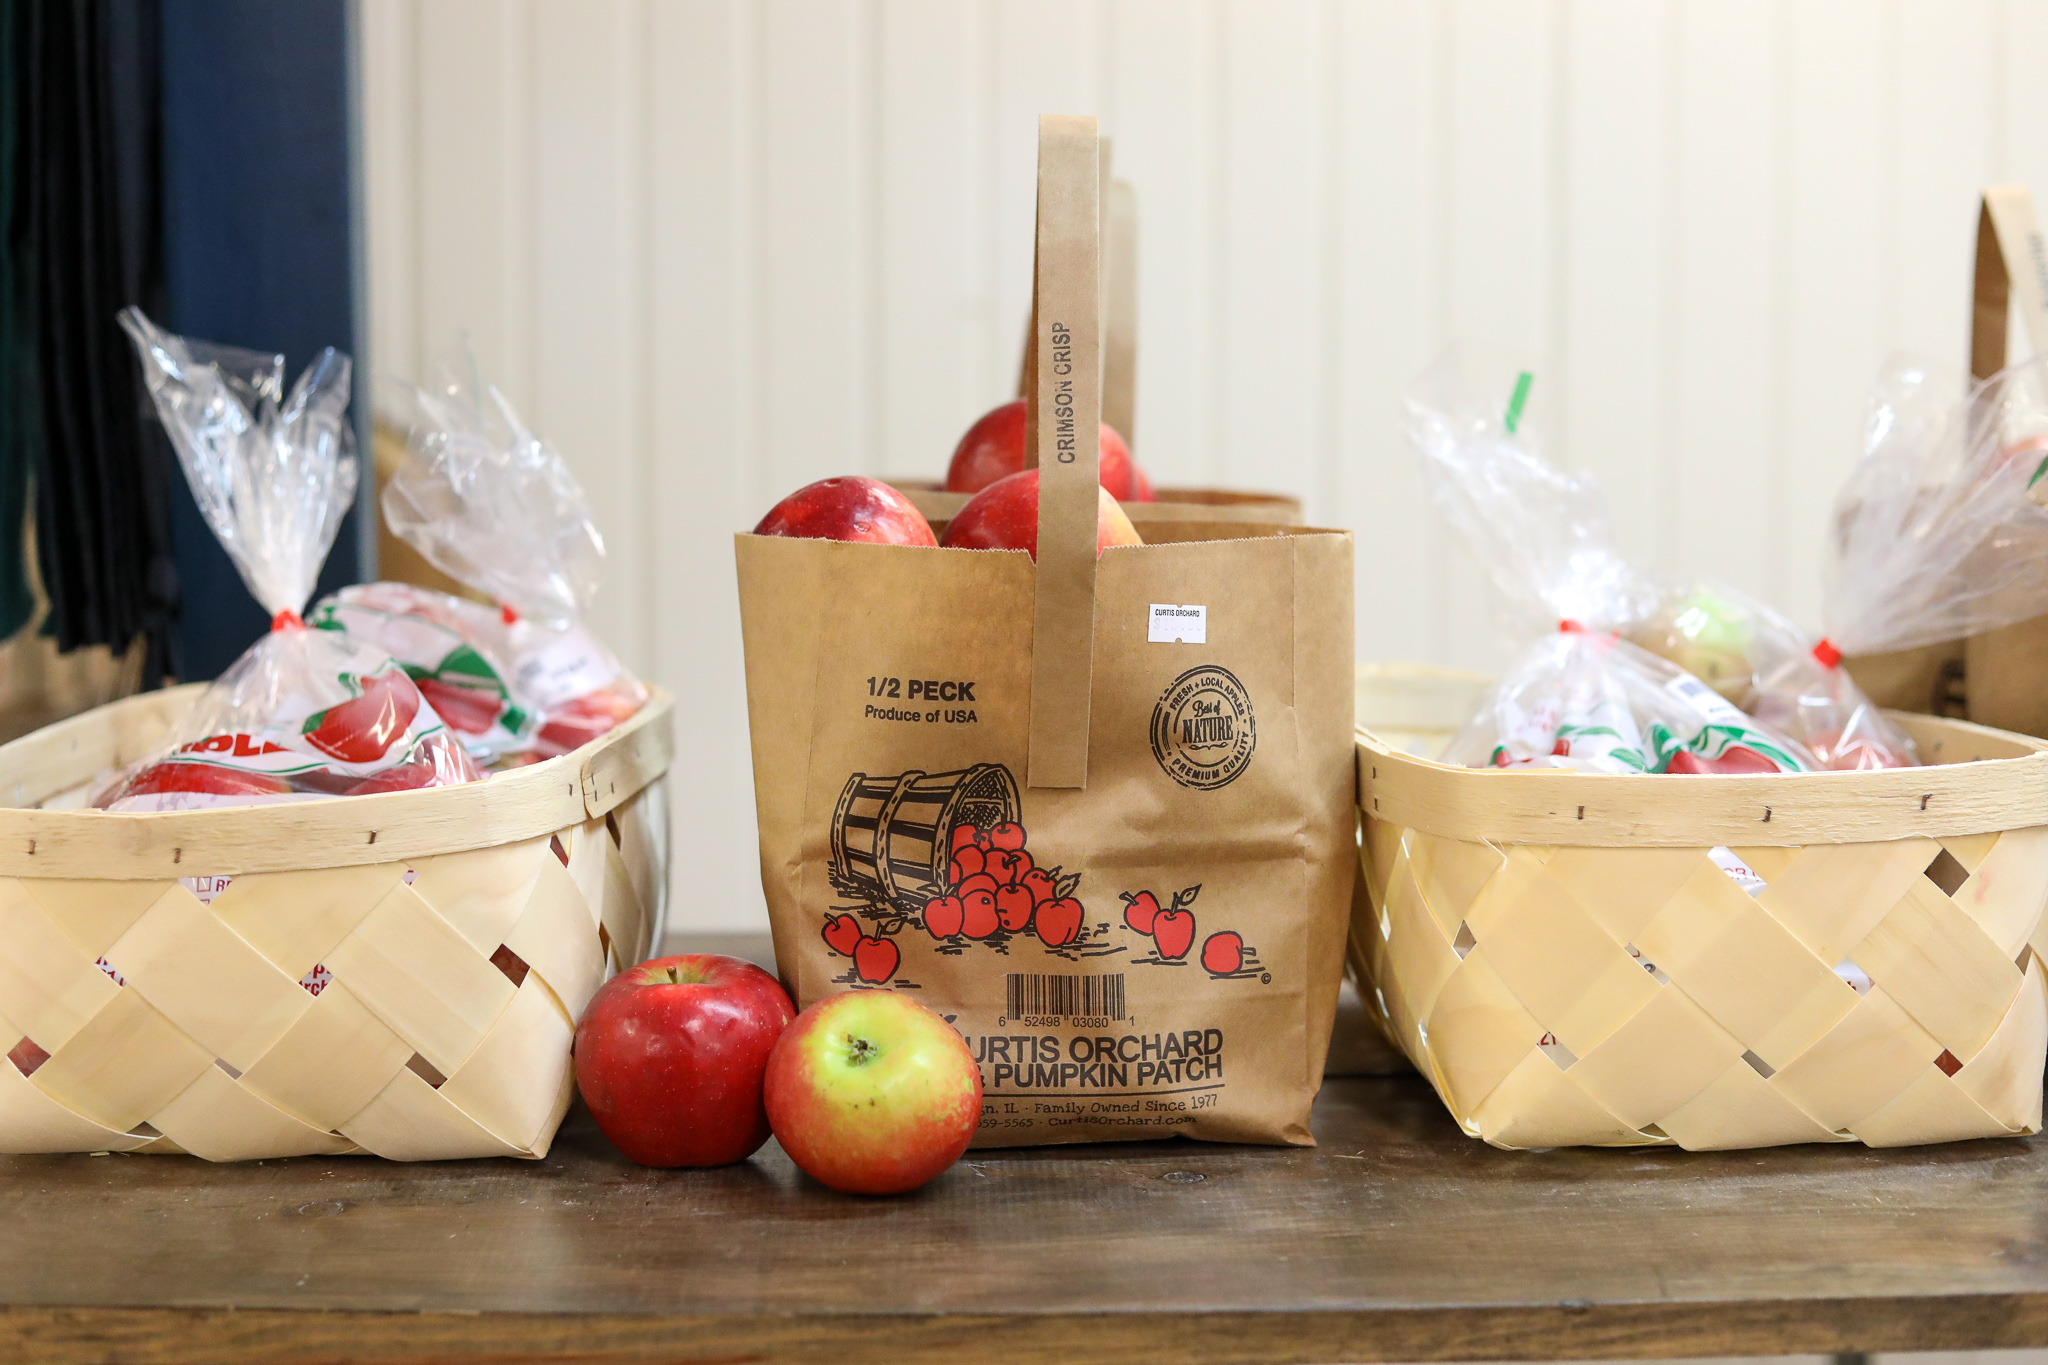 Basket of apples from Curtis Orchard & Pumpkin Patch.